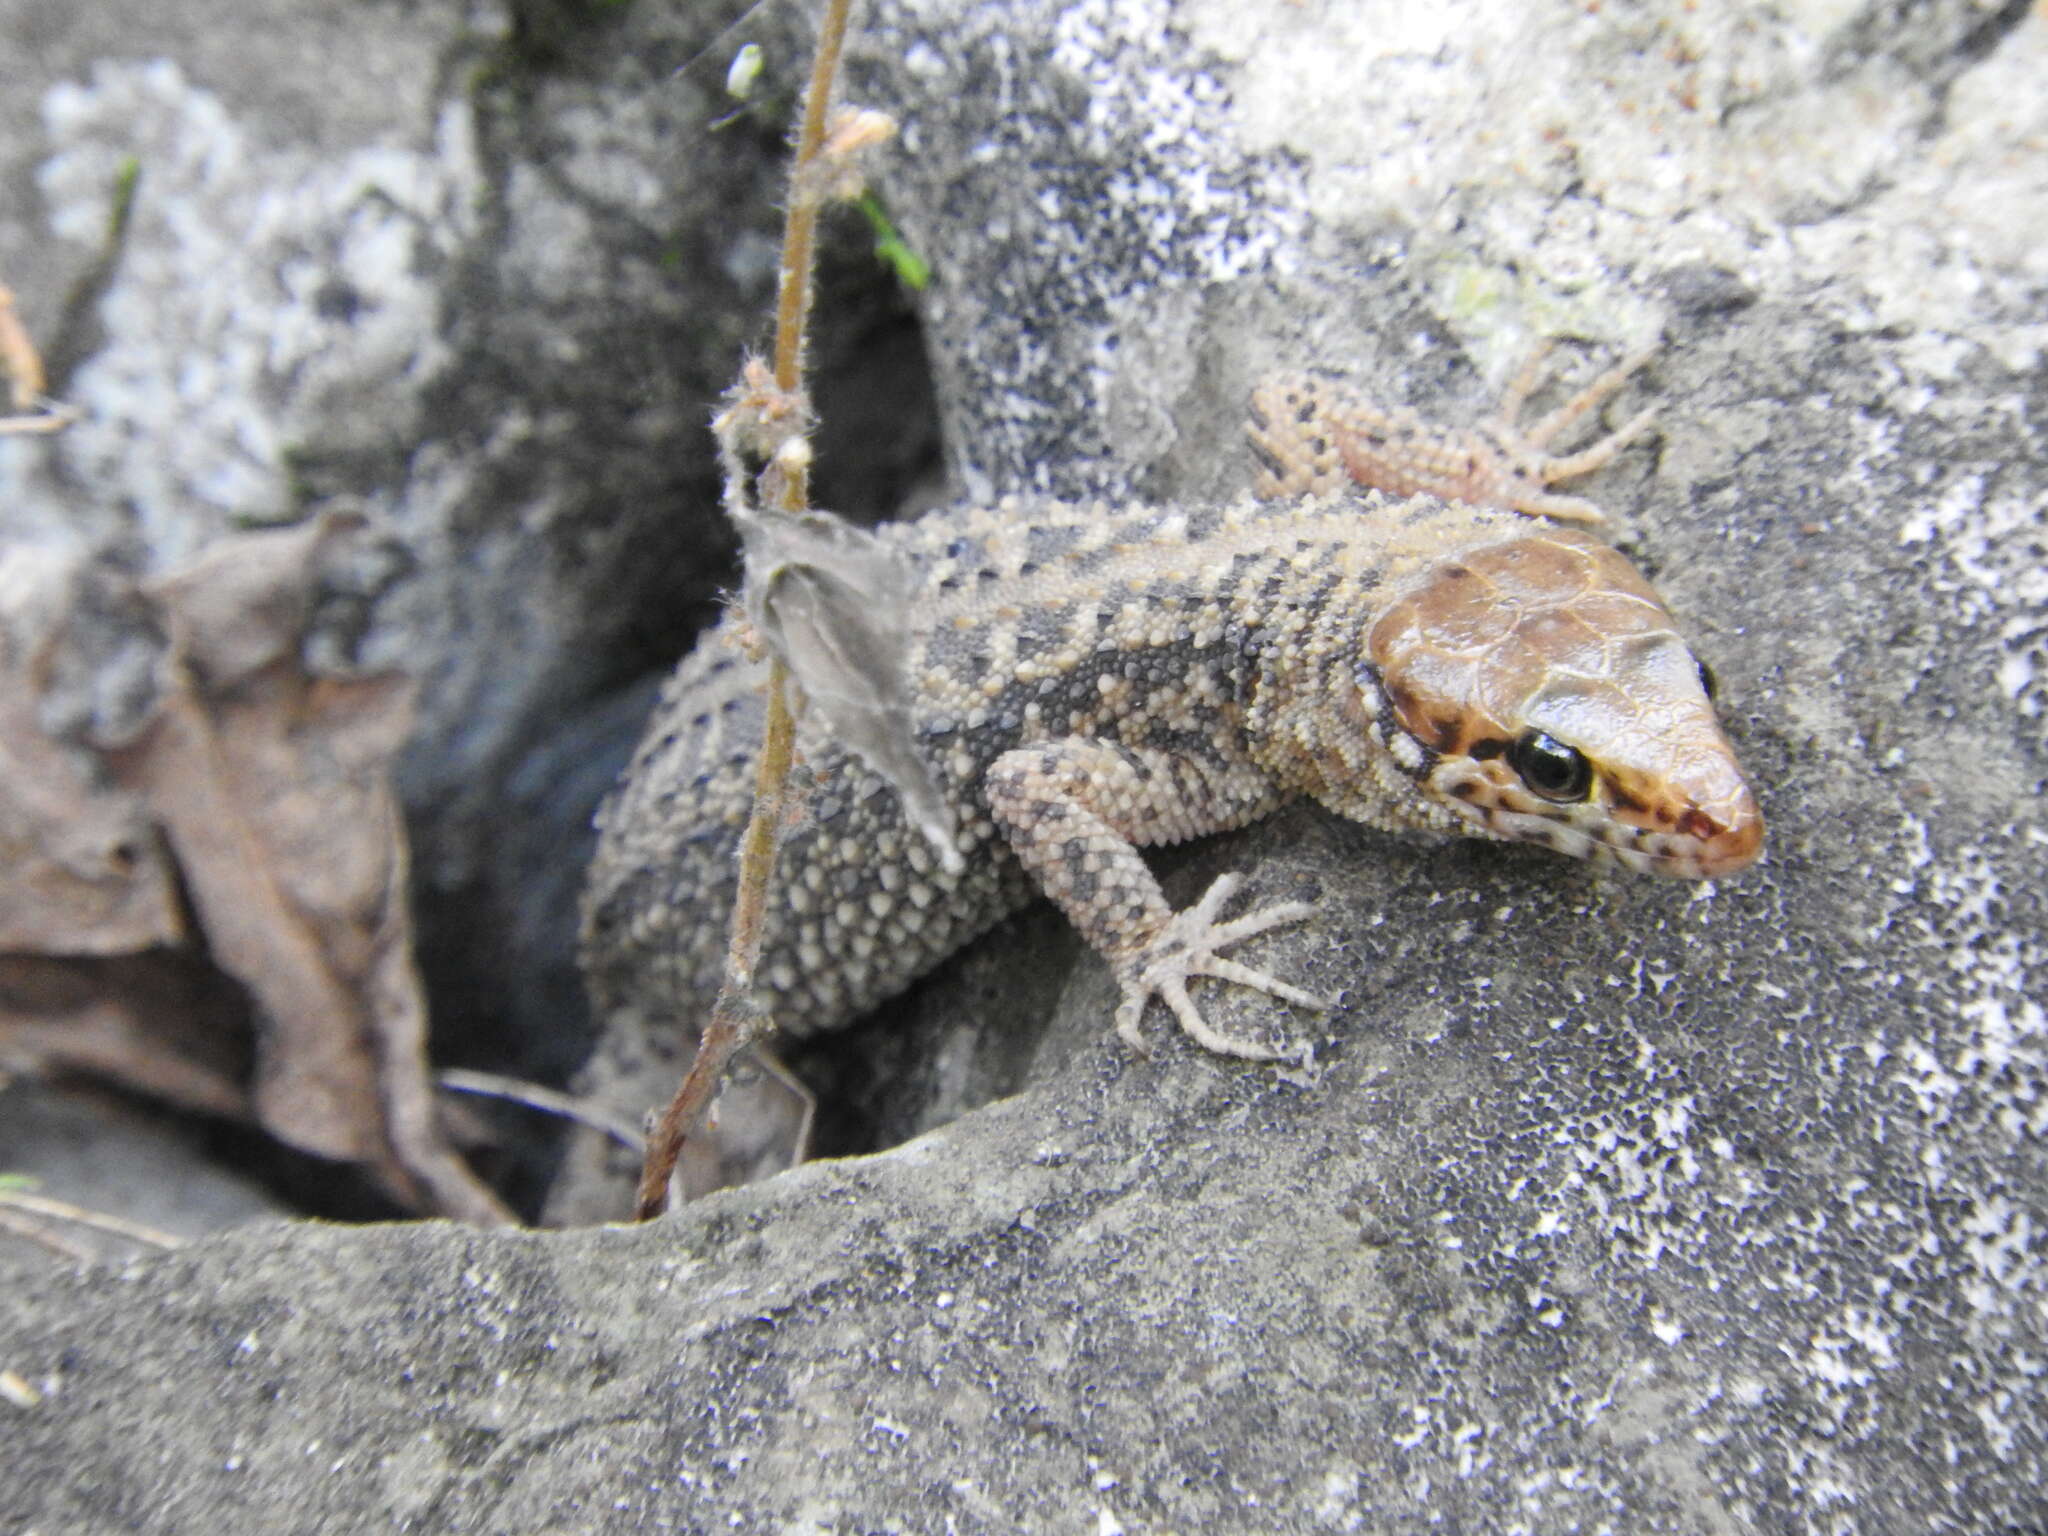 Image of Madrean Tropical Night Lizard